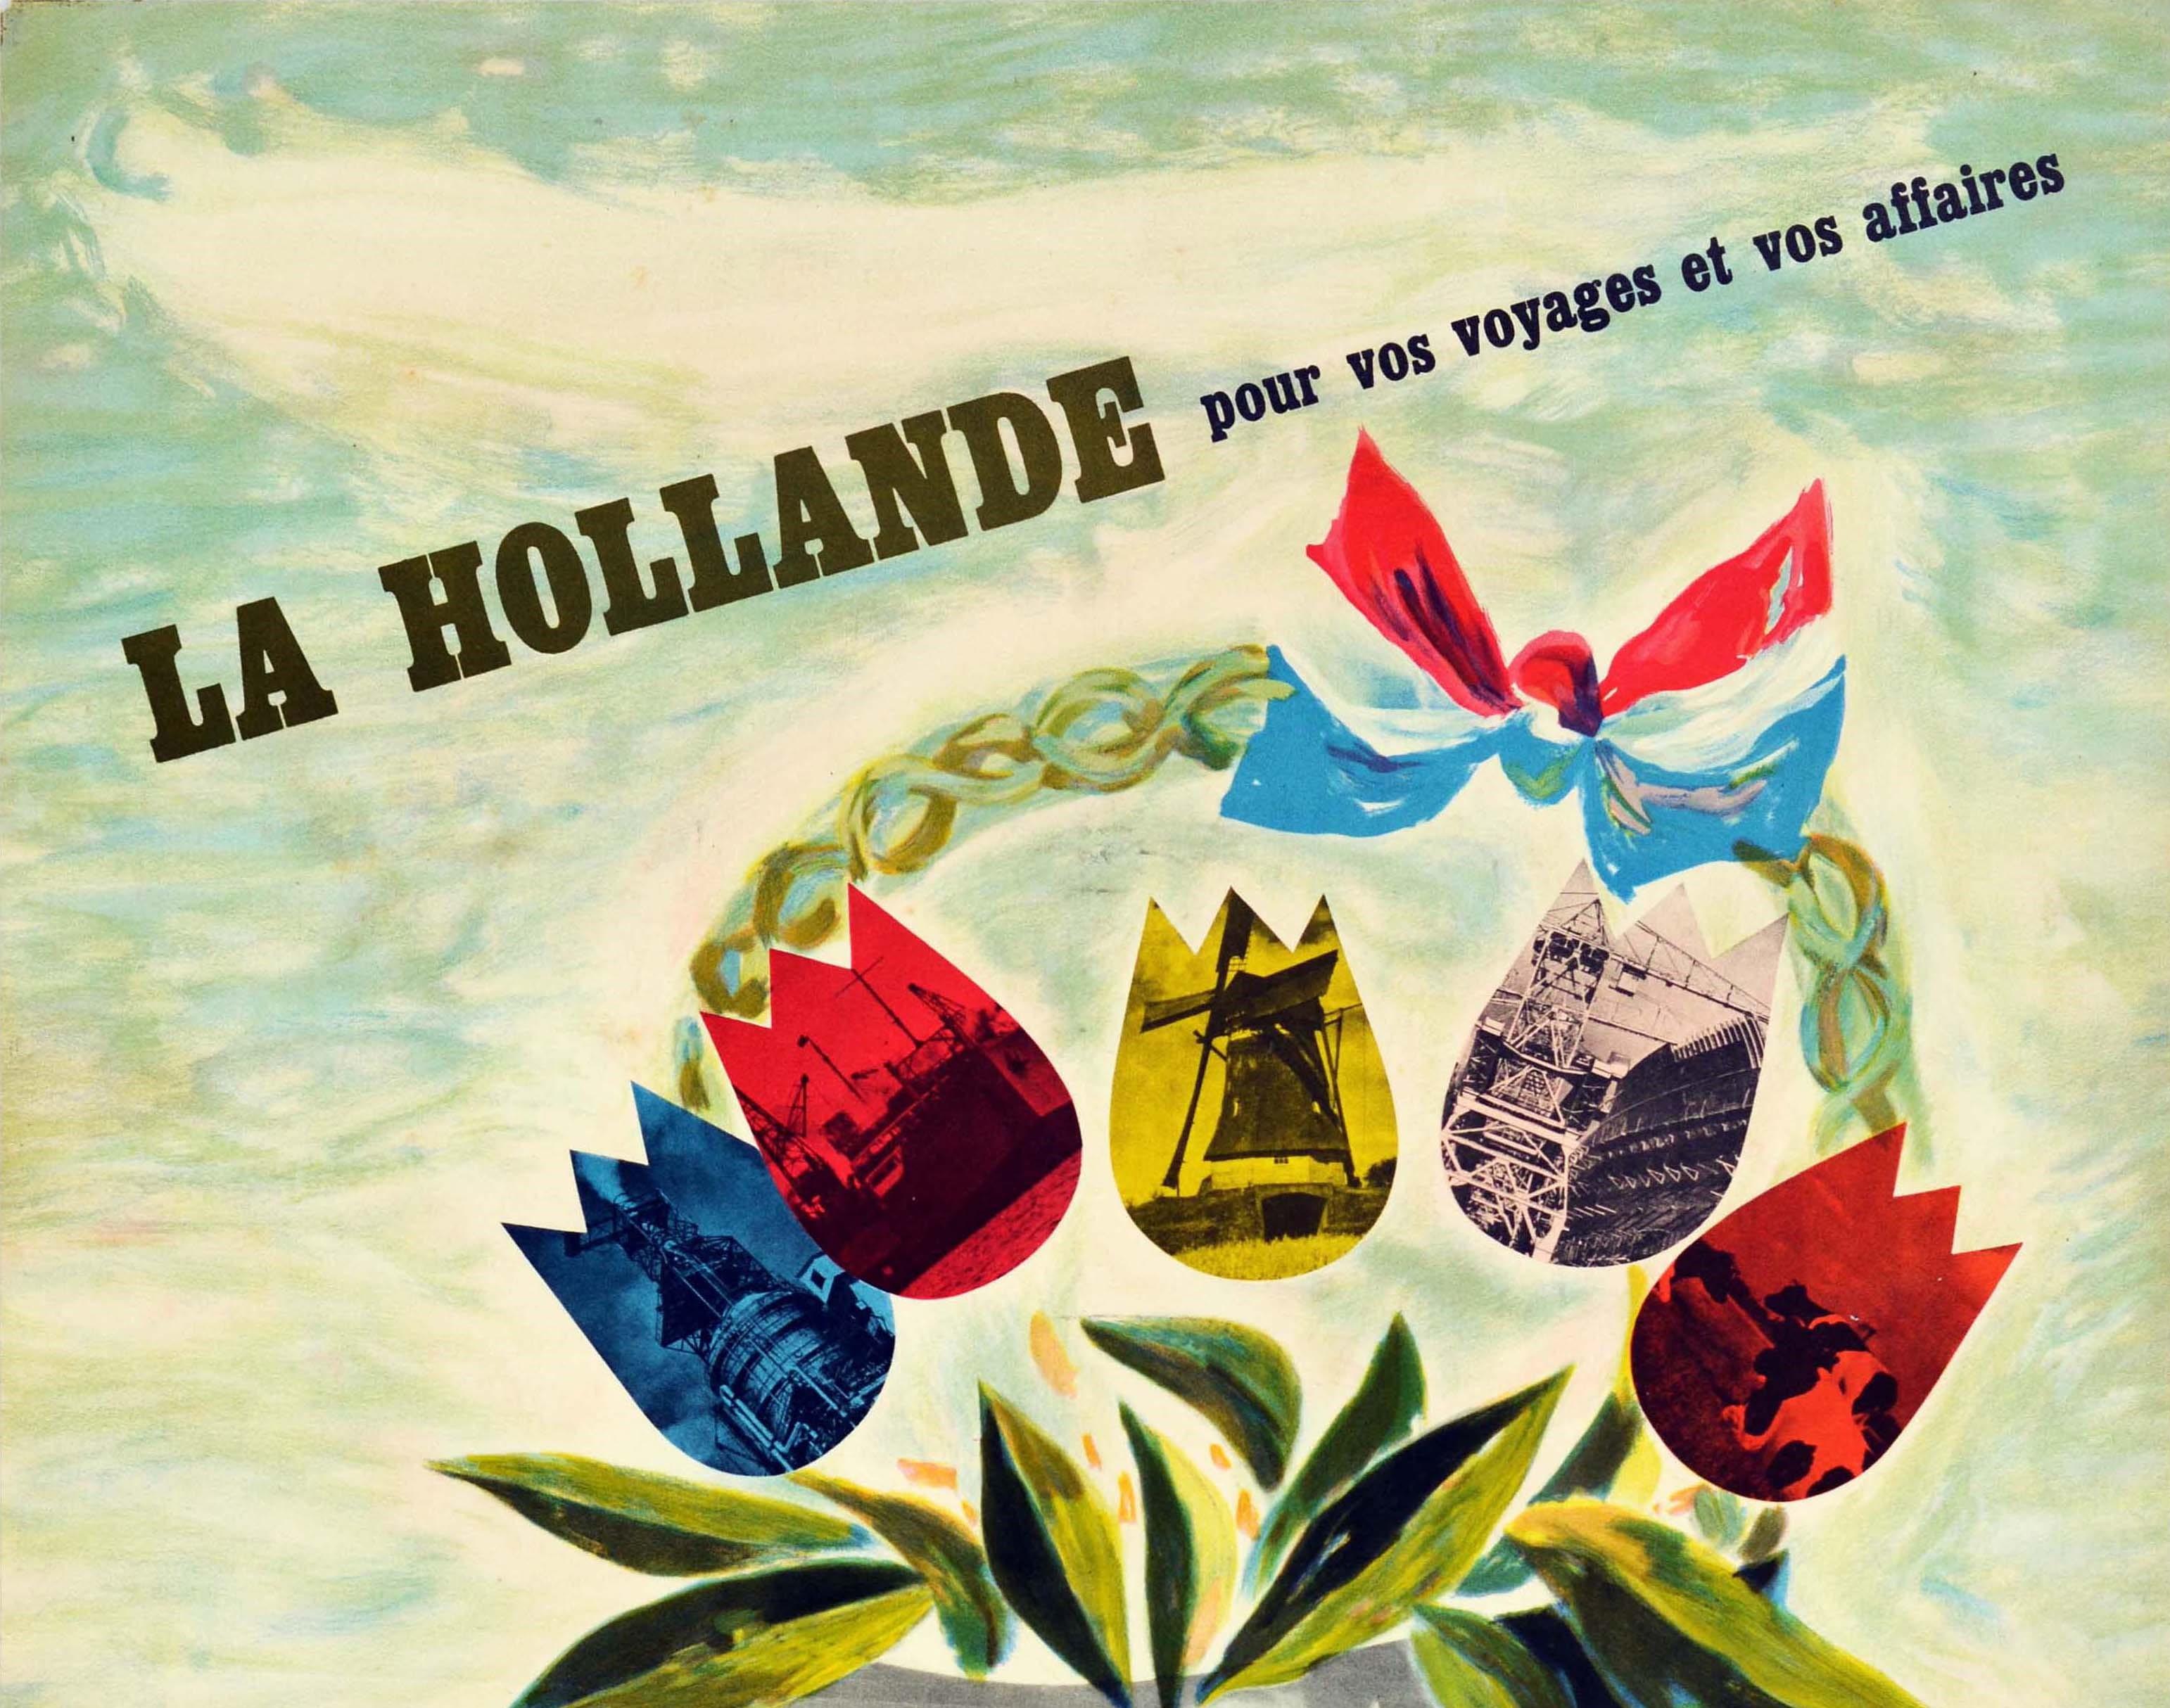 Original vintage travel poster - La Hollande pour vos voyages et vos affaires - Holland for your travel and business - featuring a basket of colourful tulips topped with a bow in the red white and blue flag design of the Netherlands on a leather